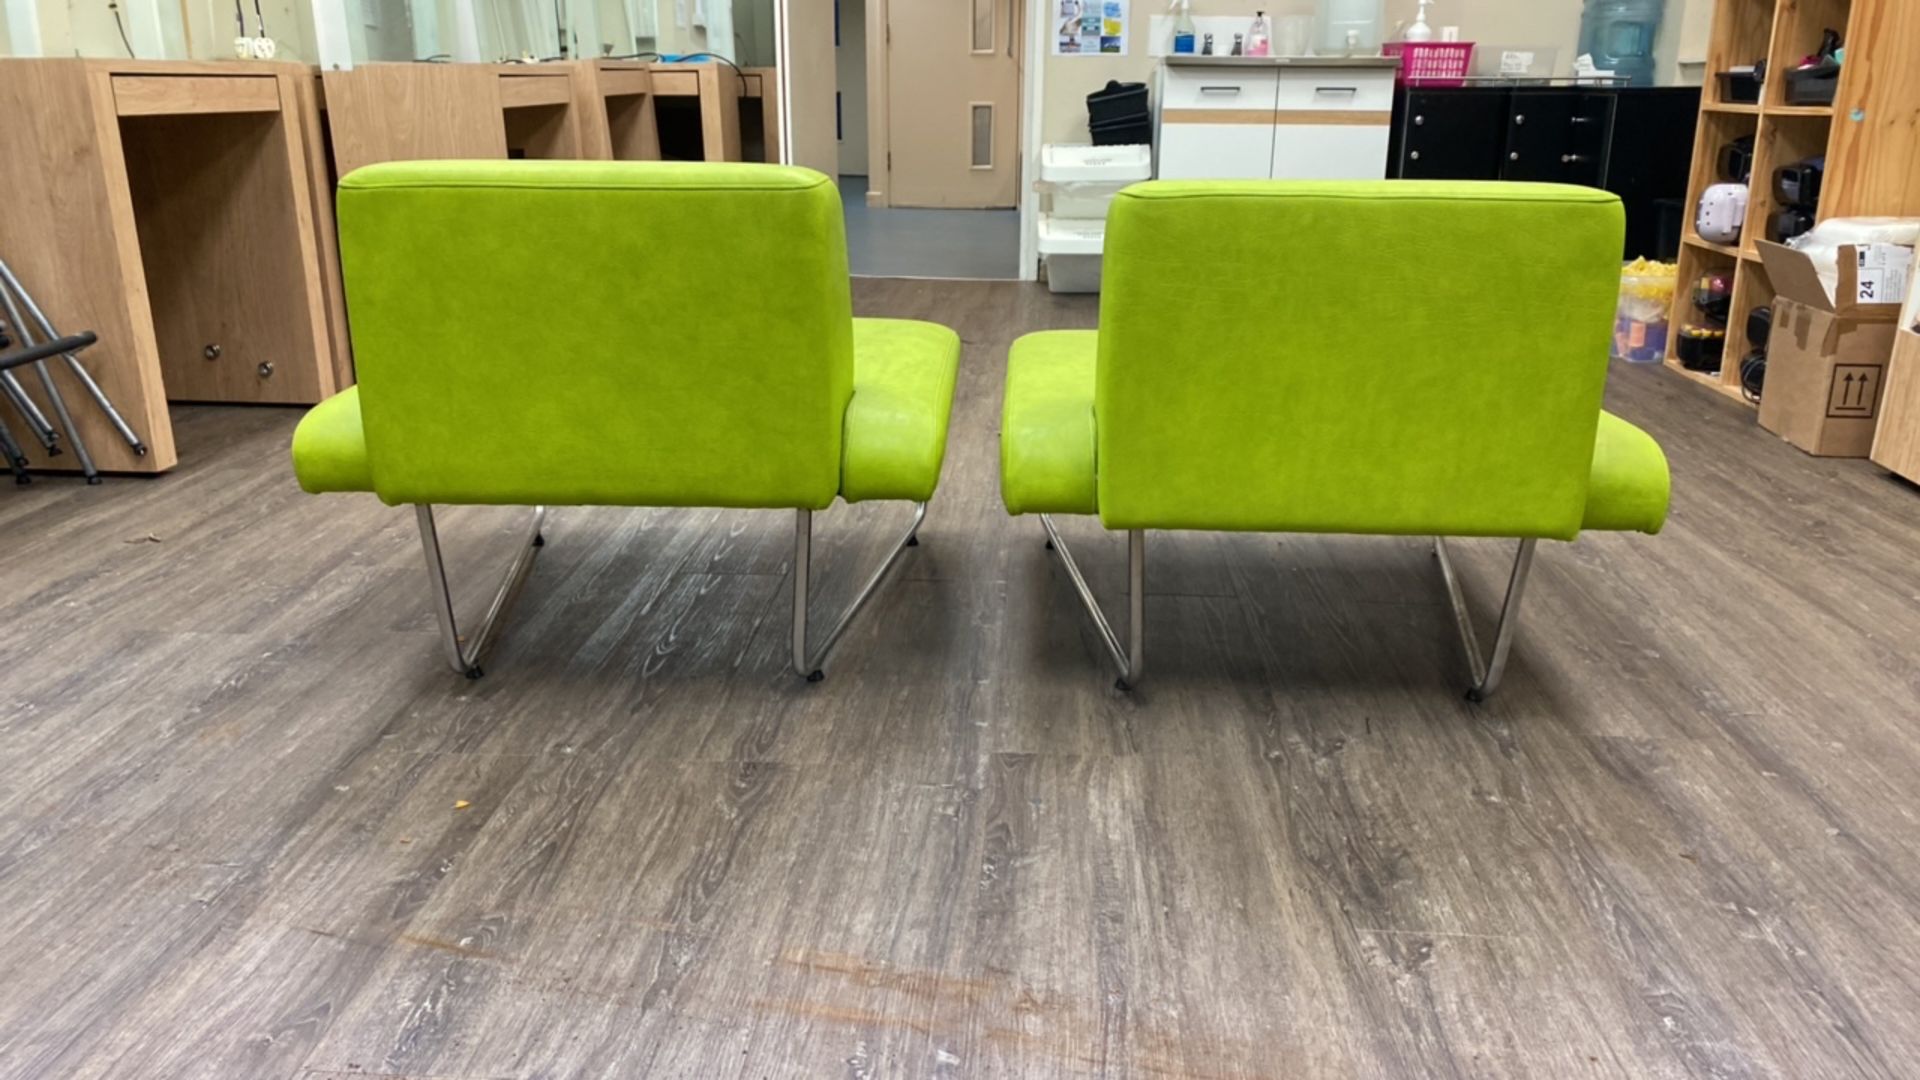 Pair of Contemporary Reception Chairs - Image 5 of 12